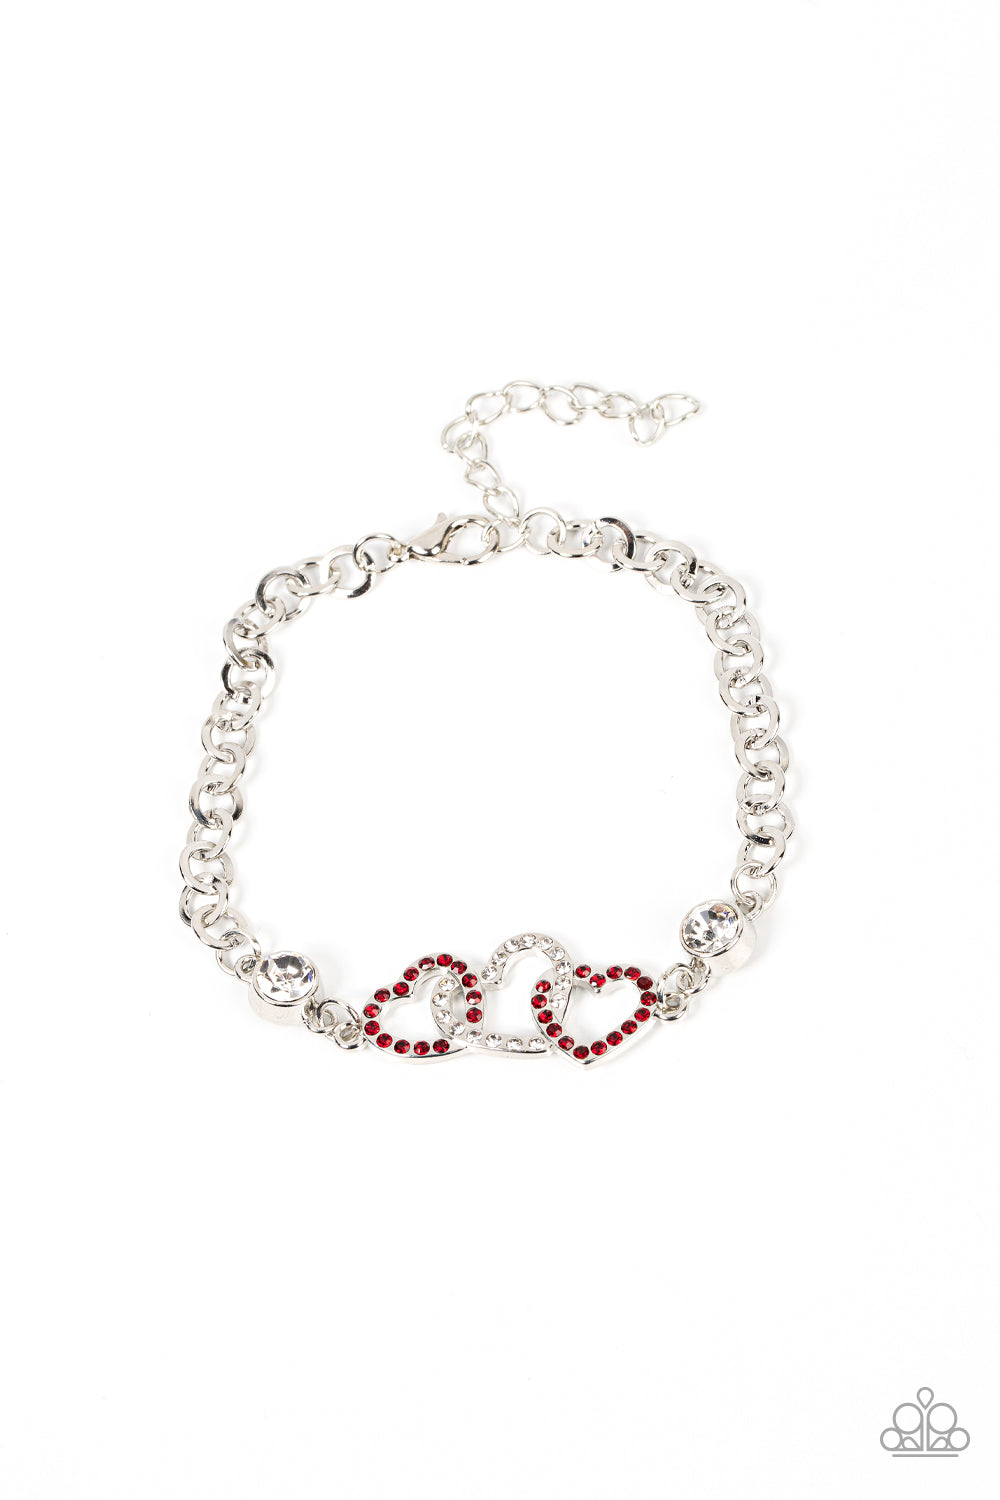 PRE-ORDER - Paparazzi Desirable Dazzle - Red - Bracelet - $5 Jewelry with Ashley Swint